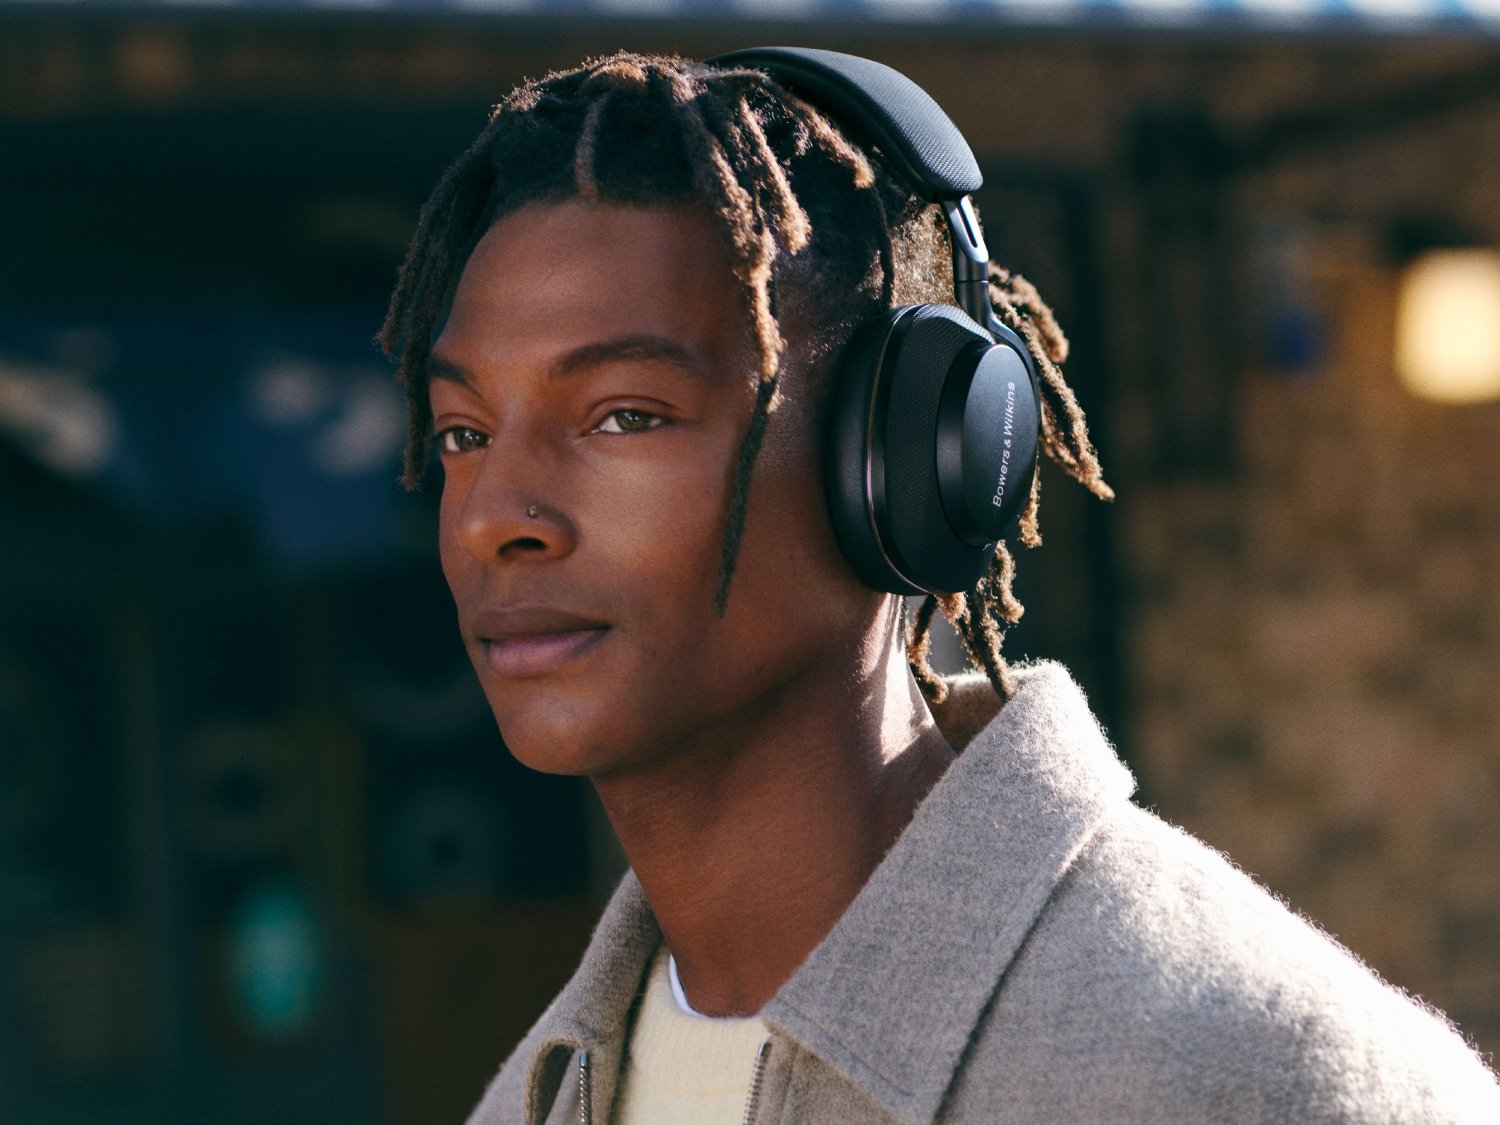 Bowers & Wilkins Px7 S2e Wireless Headphones Replace the Px7s